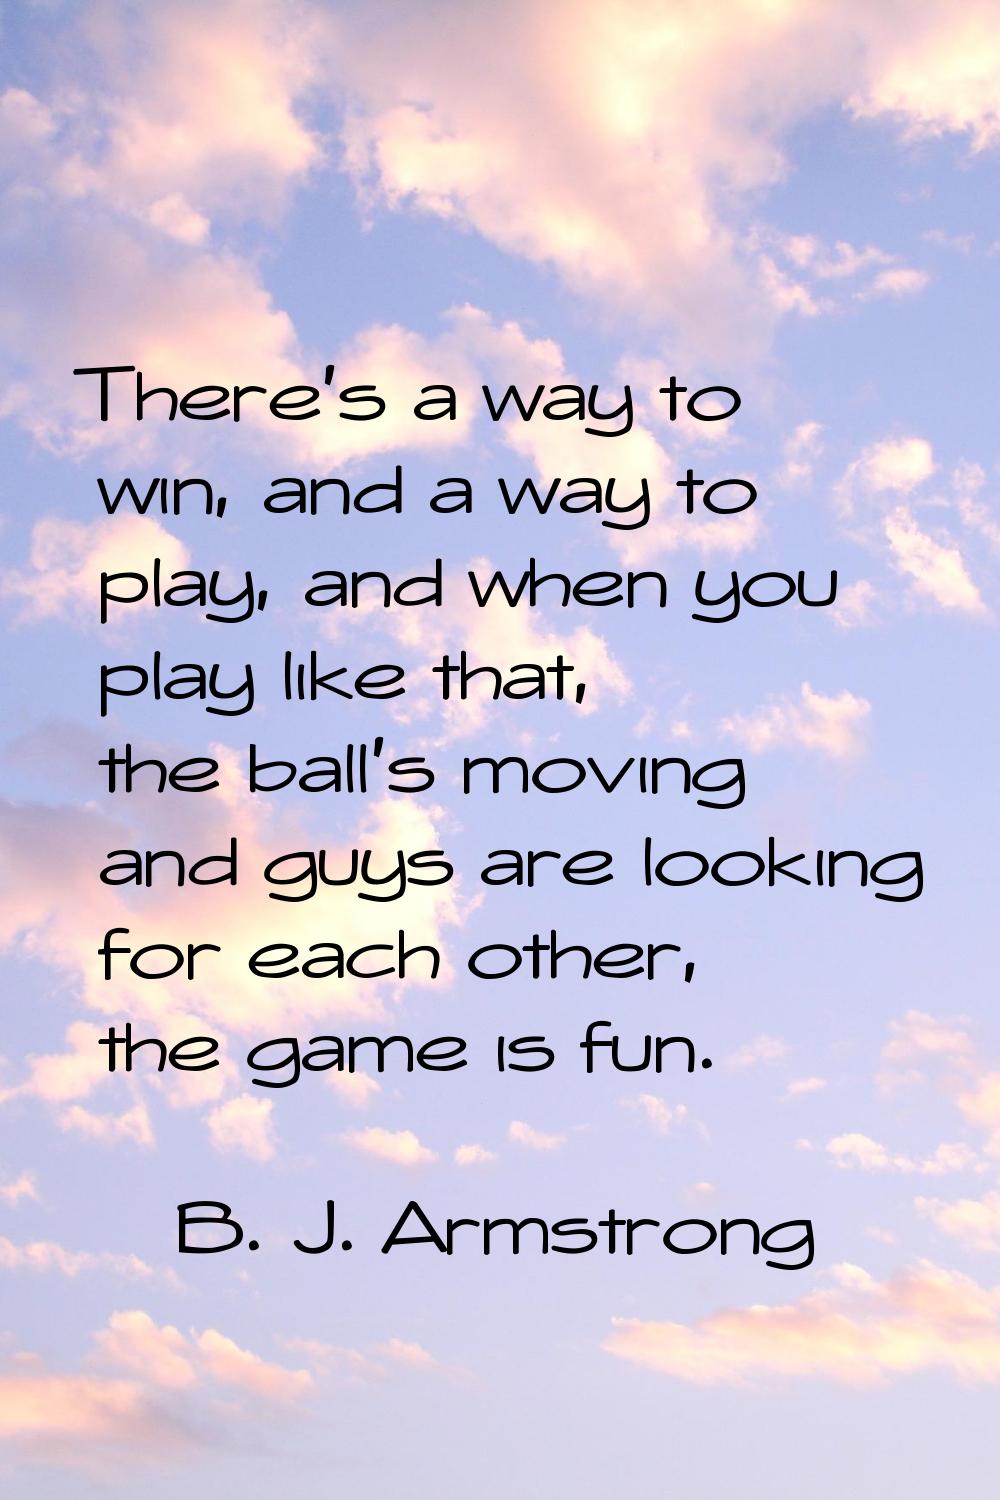 There's a way to win, and a way to play, and when you play like that, the ball's moving and guys ar